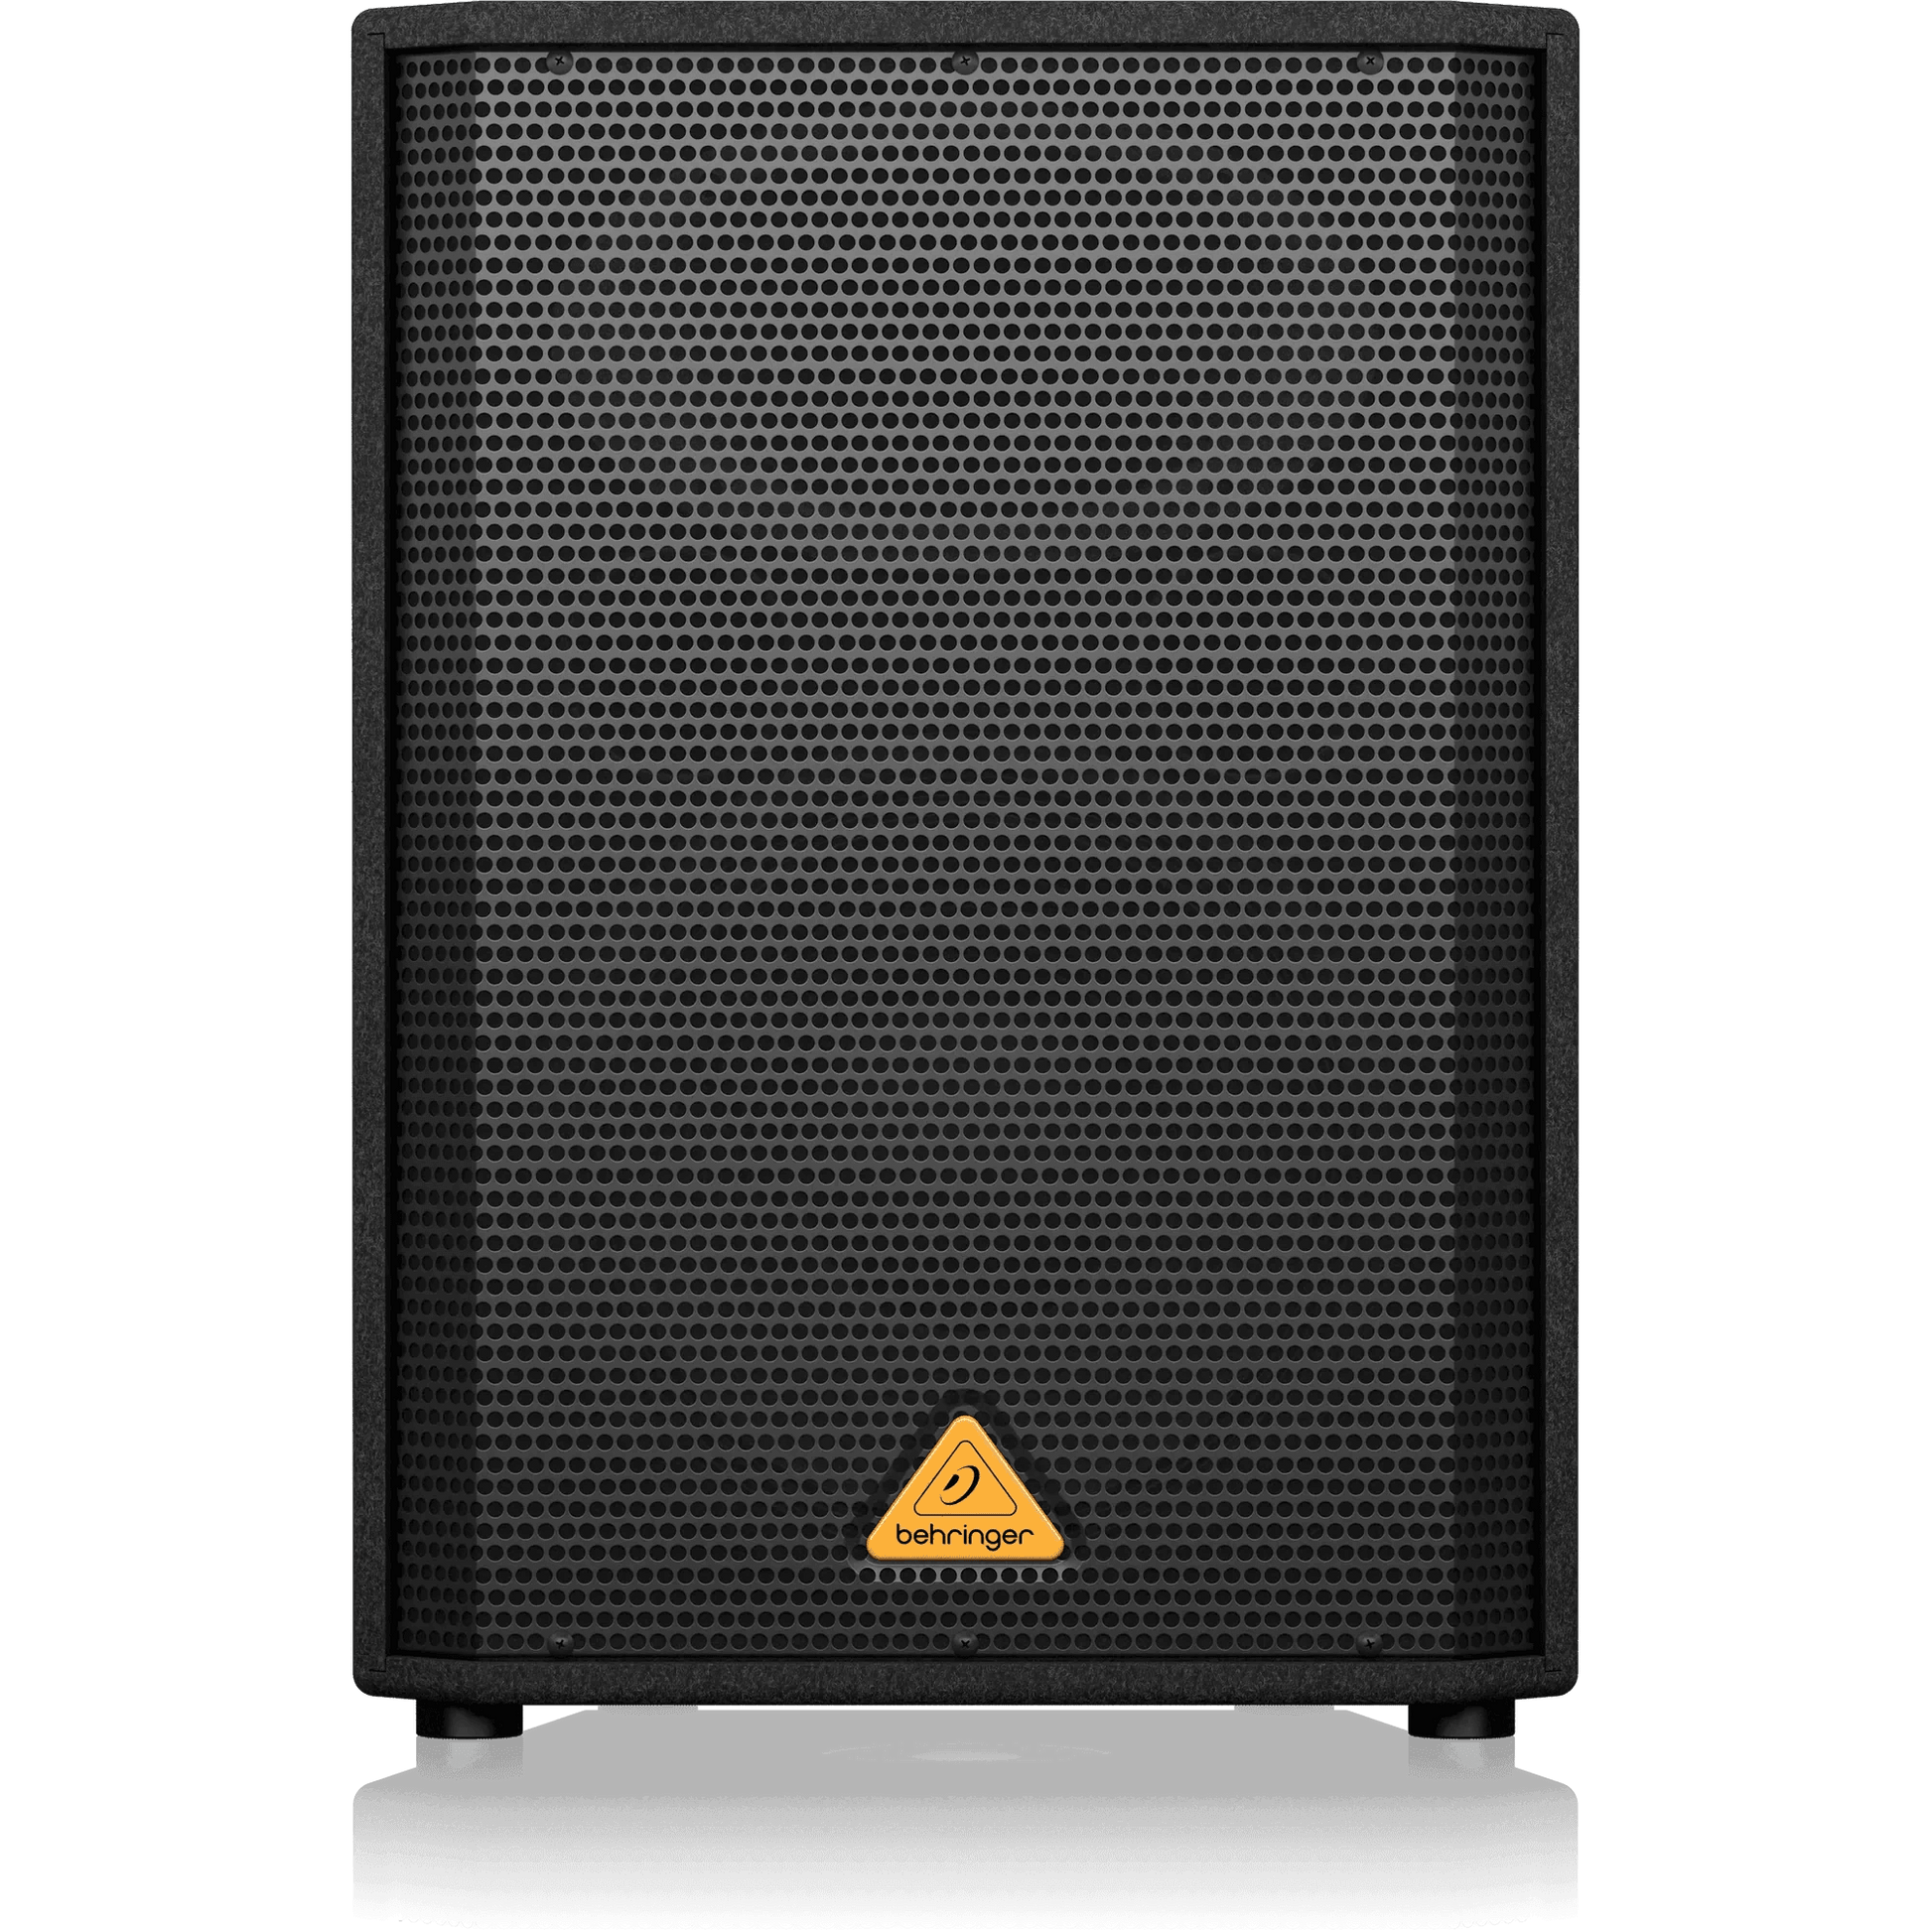 Behringer VP1220 Professional 800W PA Speaker with 12" Woofer and 1.75" Titanium-Diaphragm Compression Driver